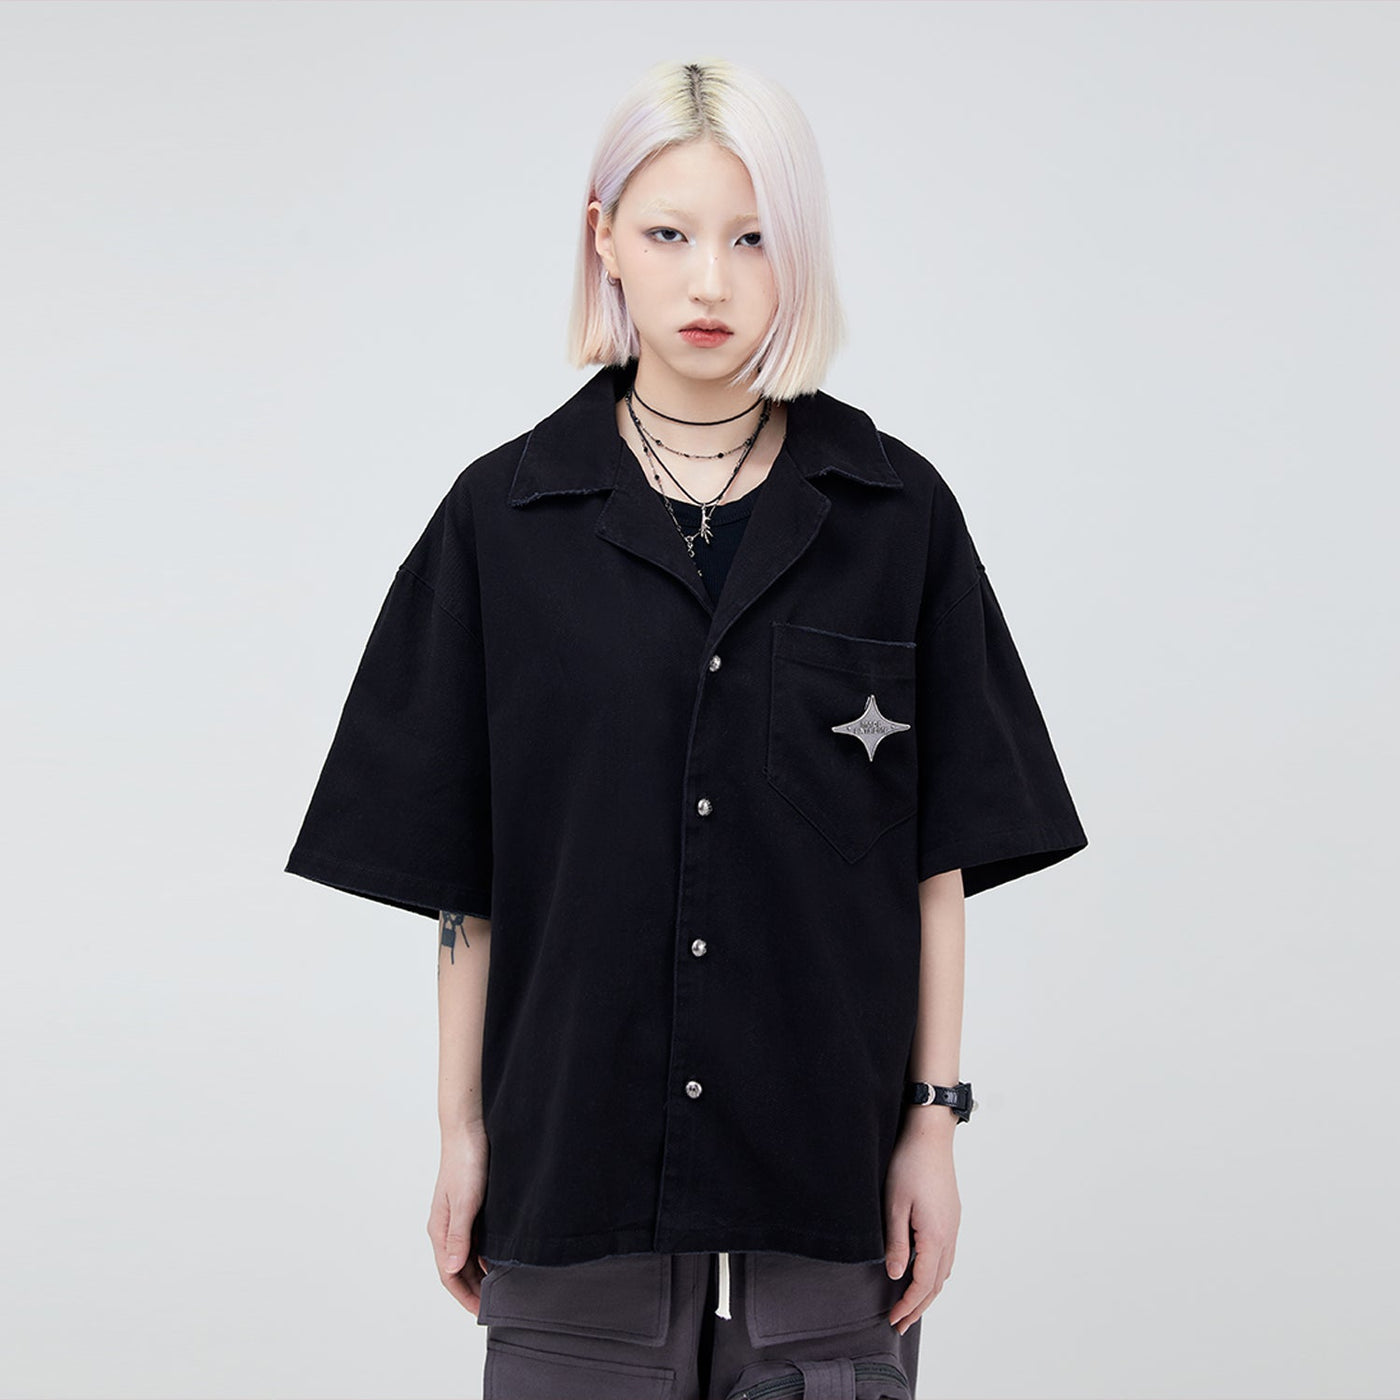 Made Extreme Logo Metal Buttoned Shirt Korean Street Fashion Shirt By Made Extreme Shop Online at OH Vault